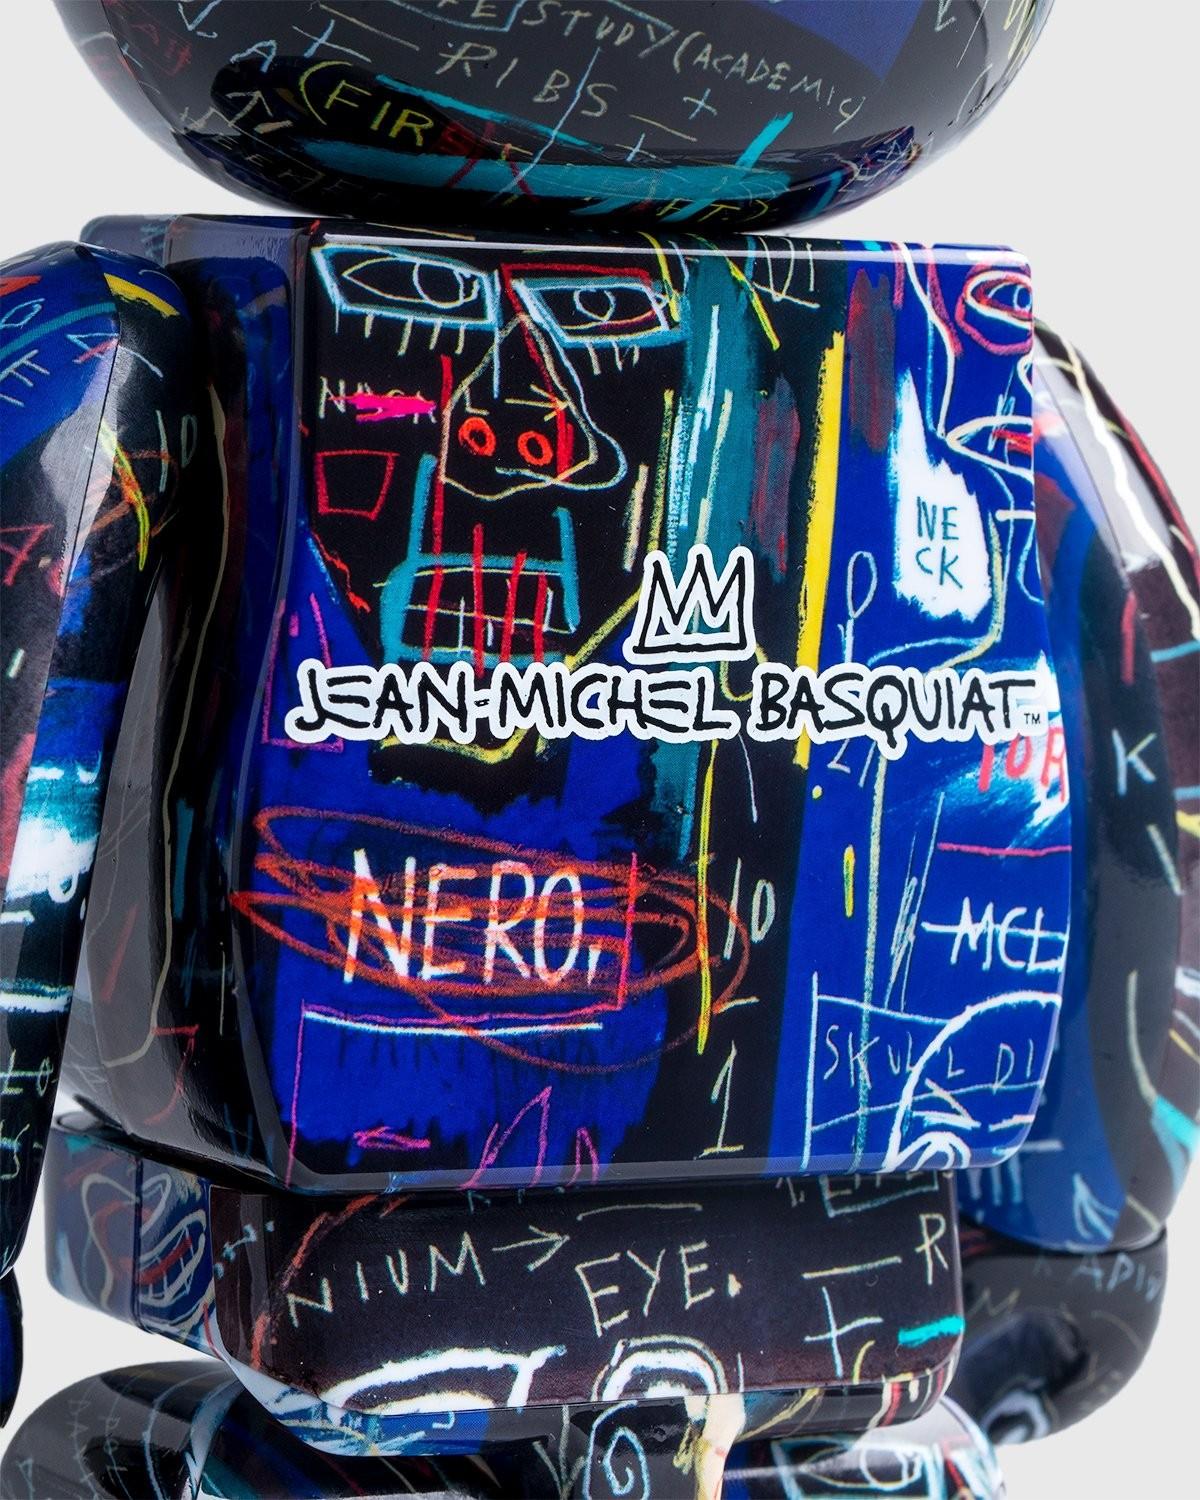 Jean-Michel Basquiat Bearbrick 400% Figures: Set of 4 works (c.2019-2021):
Unique, timeless Basquiat collectibles, each trademarked & licensed by the Estate of Jean-Michel Basquiat. The partnered figures reveals the late iconic artist’s 1980s